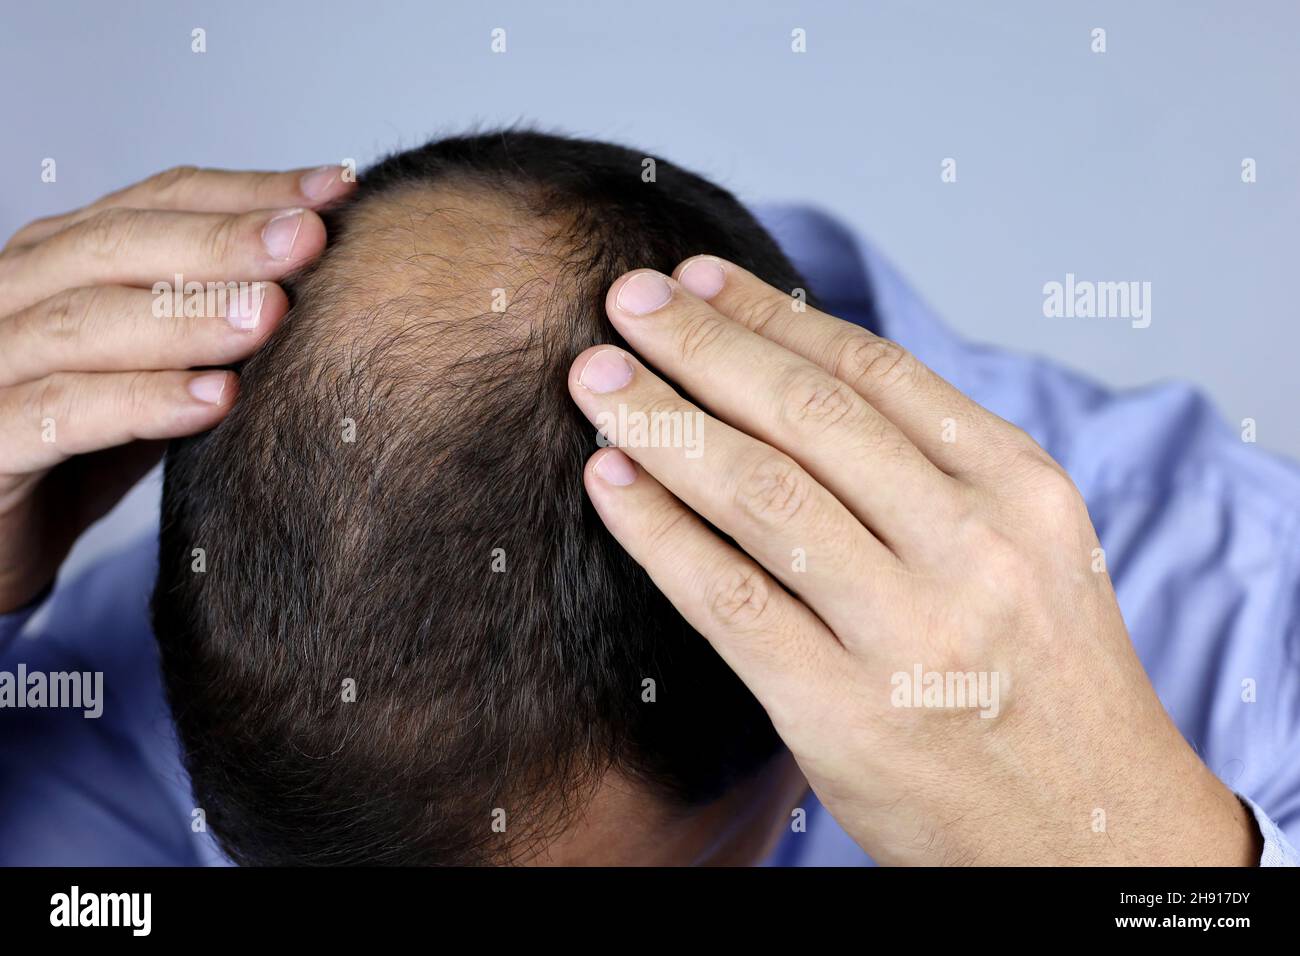 Man concerned about hair loss. Baldness, male hands on a bald Stock Photo